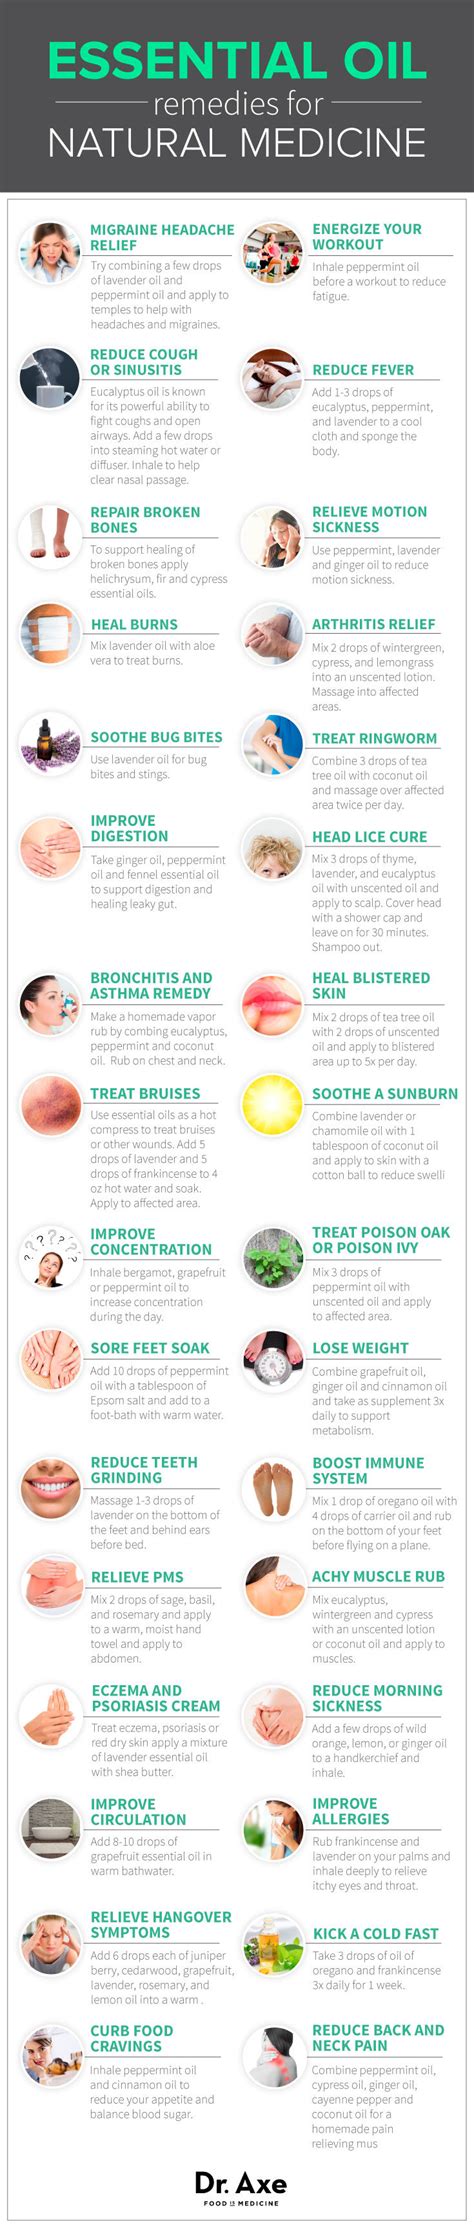 Essential Oil Remedies Infographic — Info You Should Know